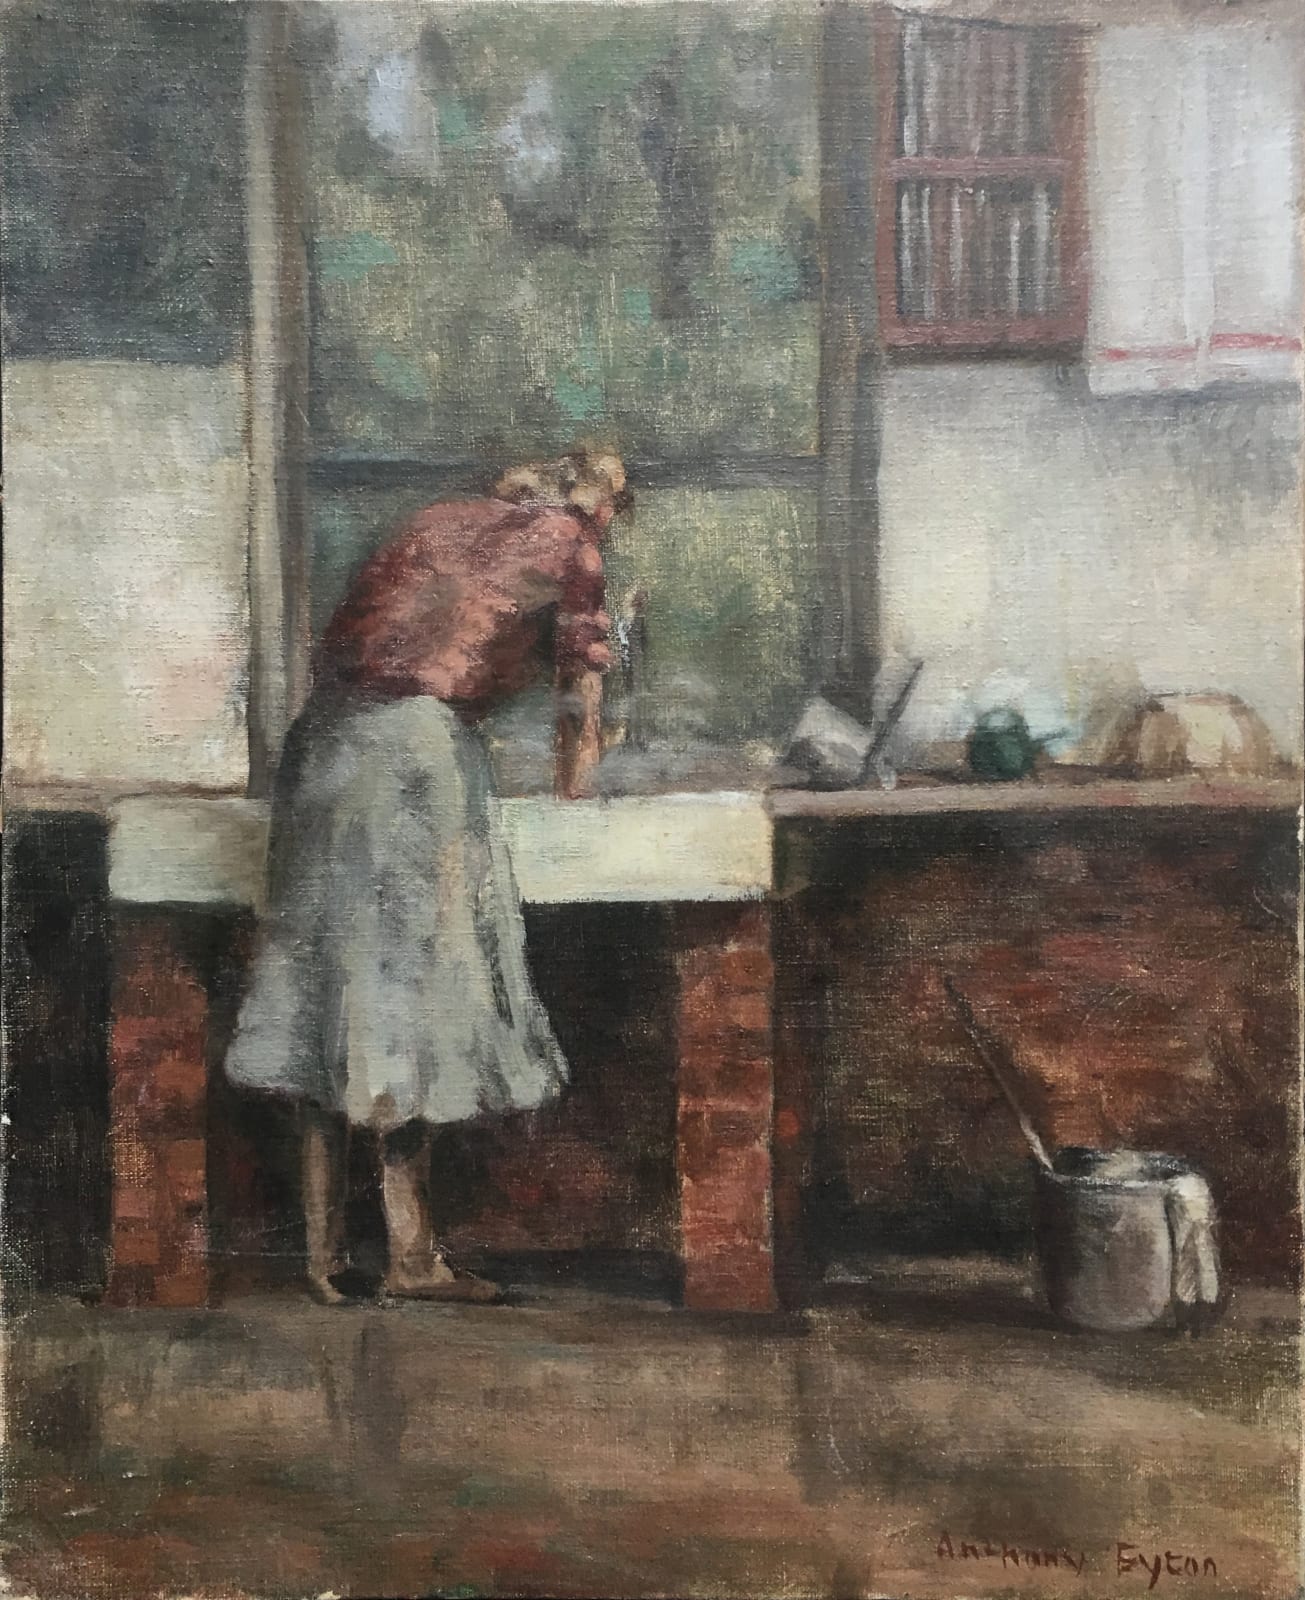 ANTHONY EYTON, Woman at the Sink, 1948